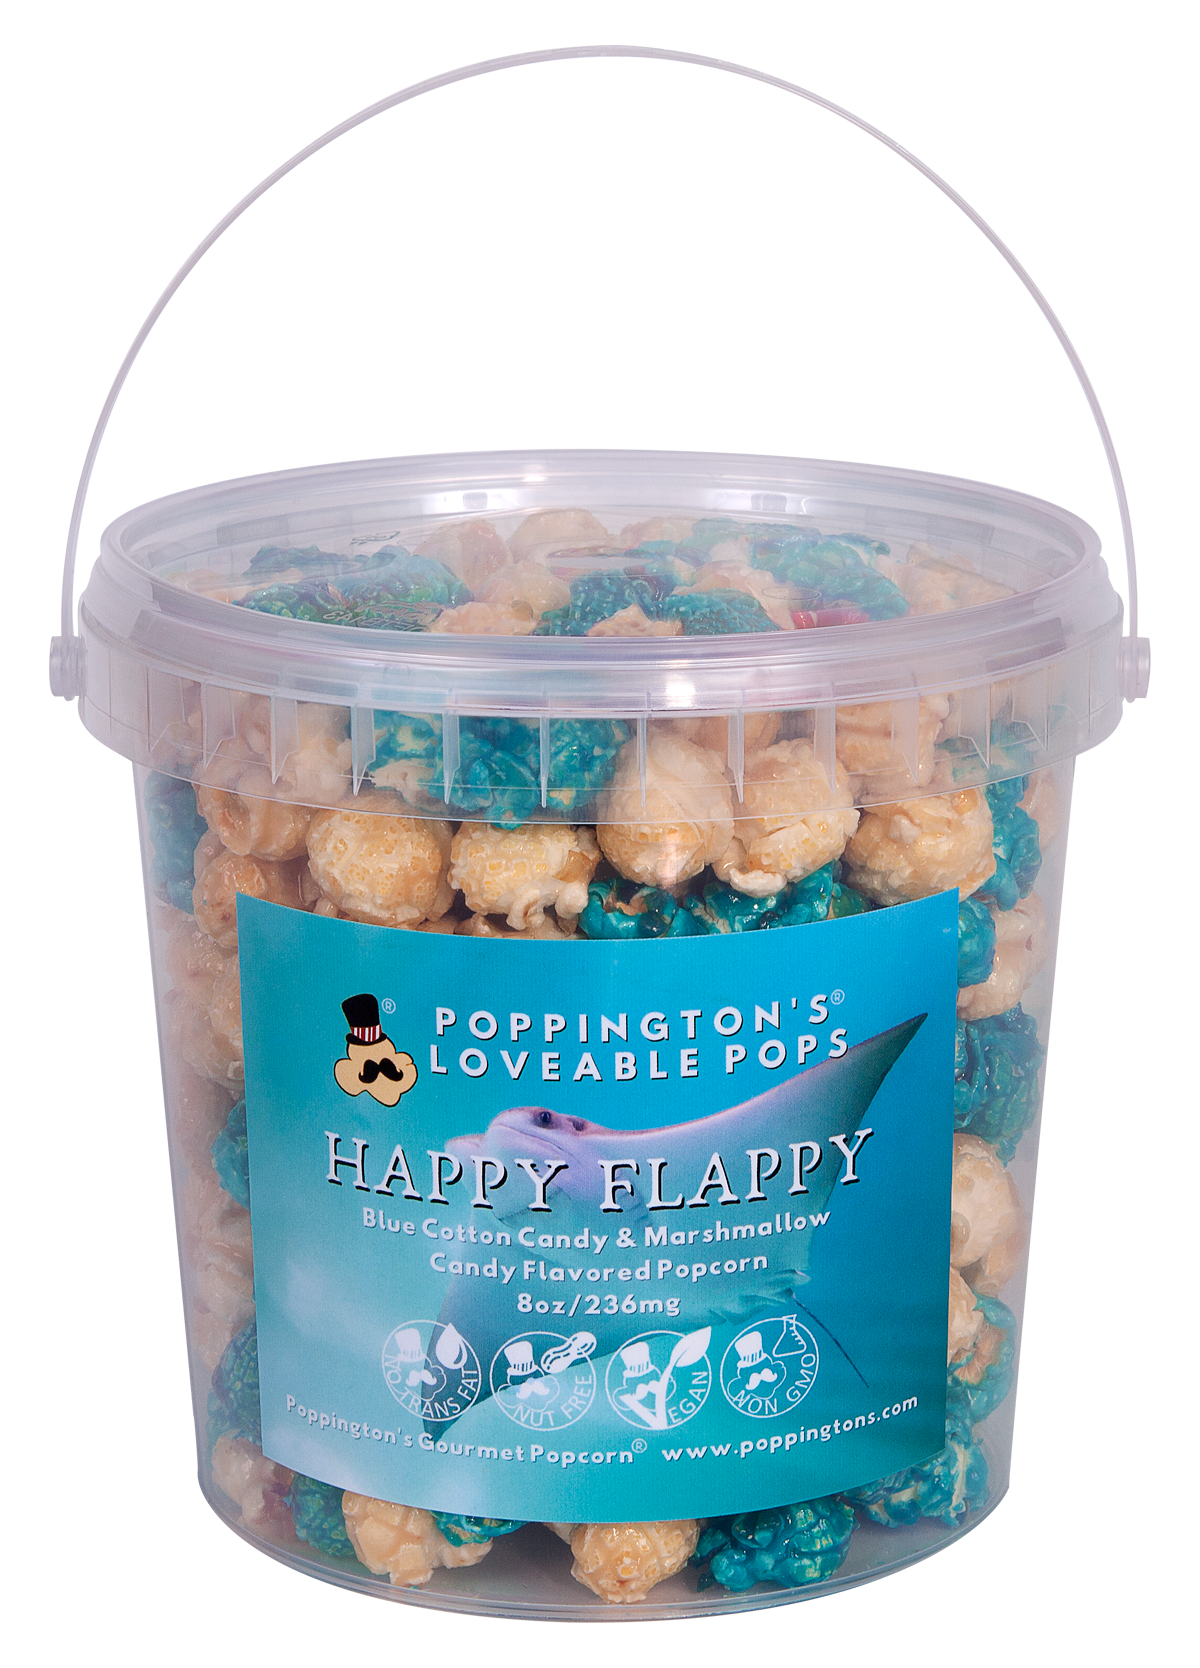 Loveable Pops Pails Happy Flappy Flavor by Poppington's Gourmet Popcorn